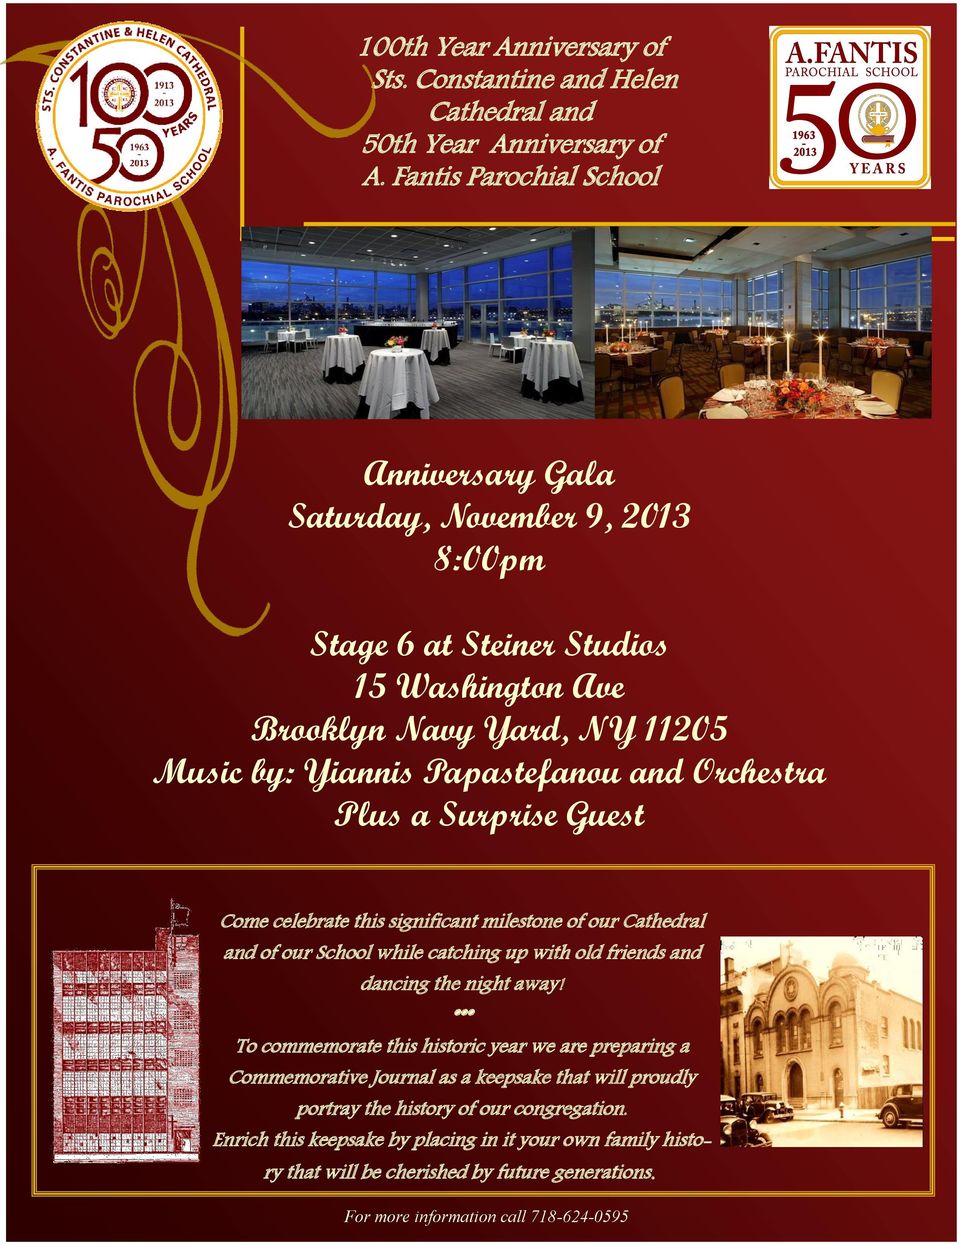 Orchestra Plus a Surprise Guest Come celebrate this significant milestone of our Cathedral and of our School while catching up with old friends and dancing the night away!